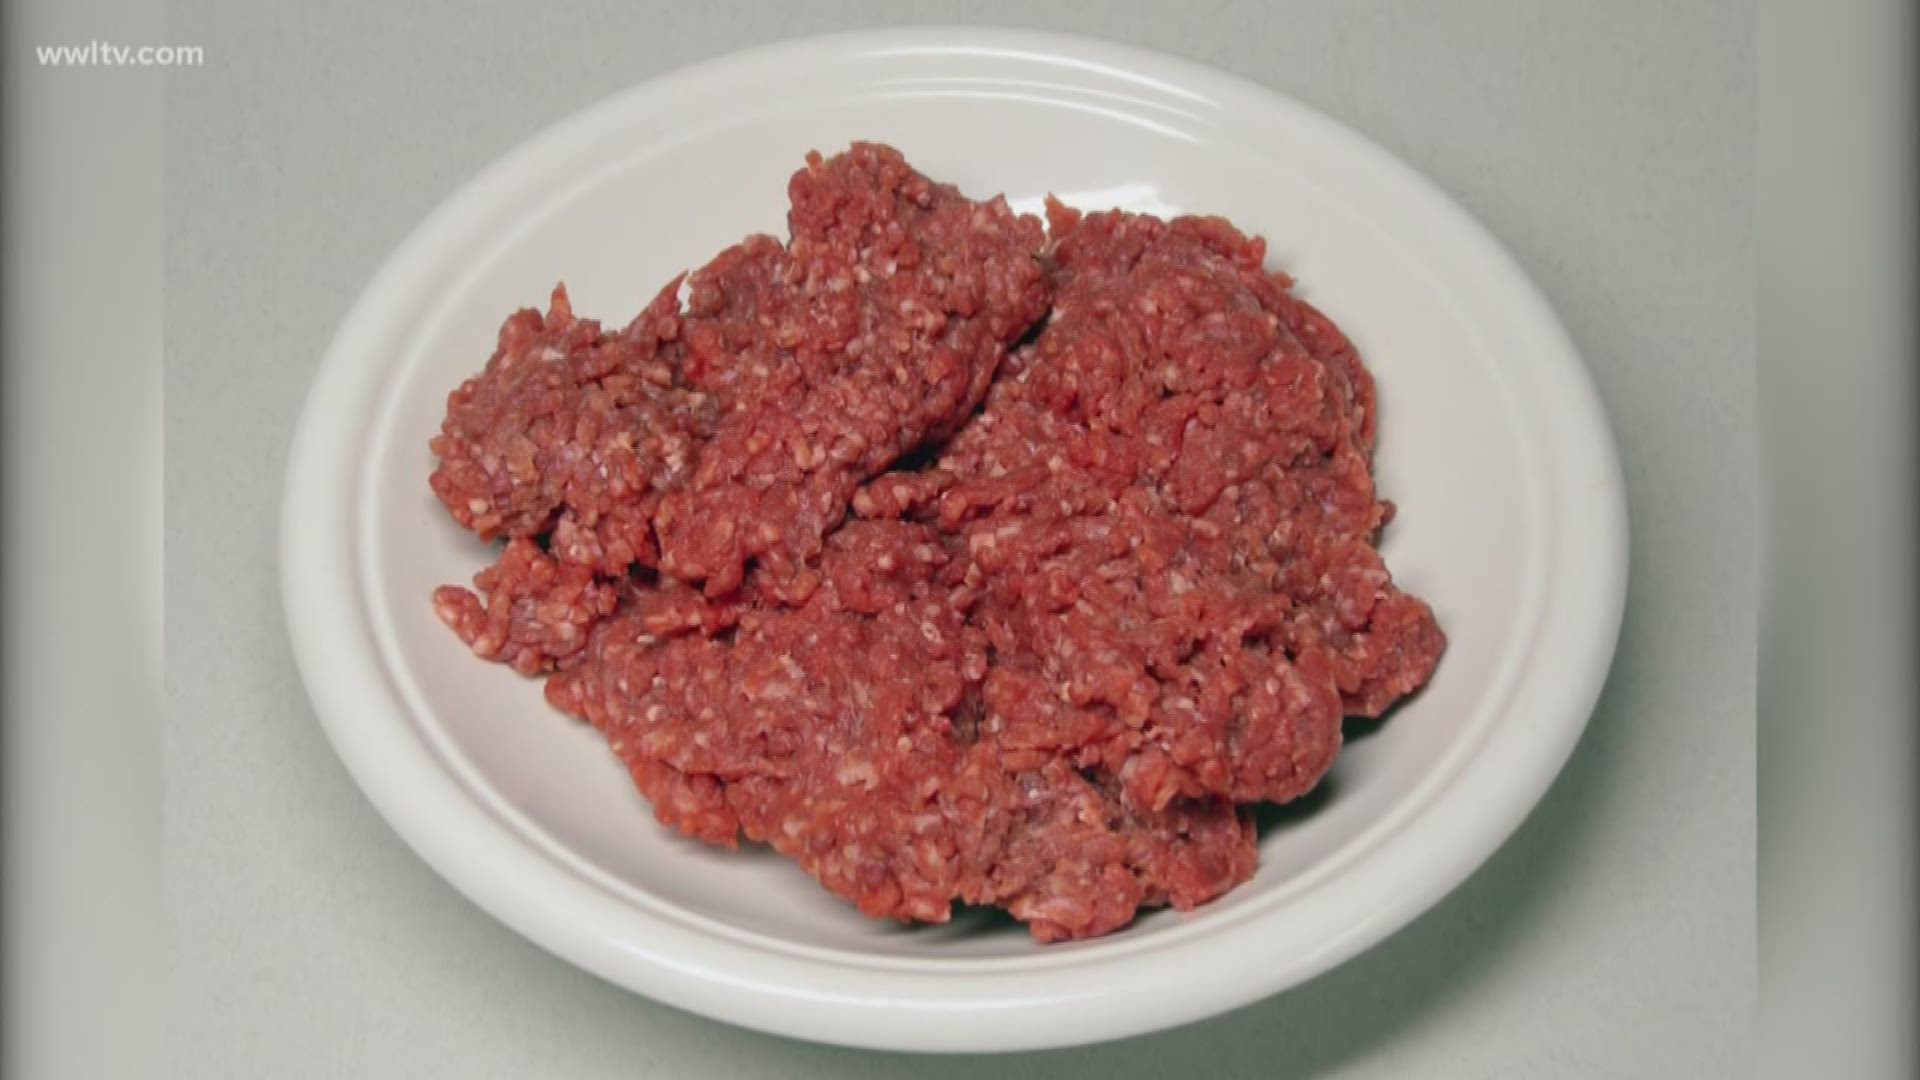 More than 66 tons of ground beef is being recalled because it could be contaminated with E.coli, the USDA announced Wednesday. At least one person has died and 17 people have gotten sick from what was likely raw ground beef, according to the USDA and Cent